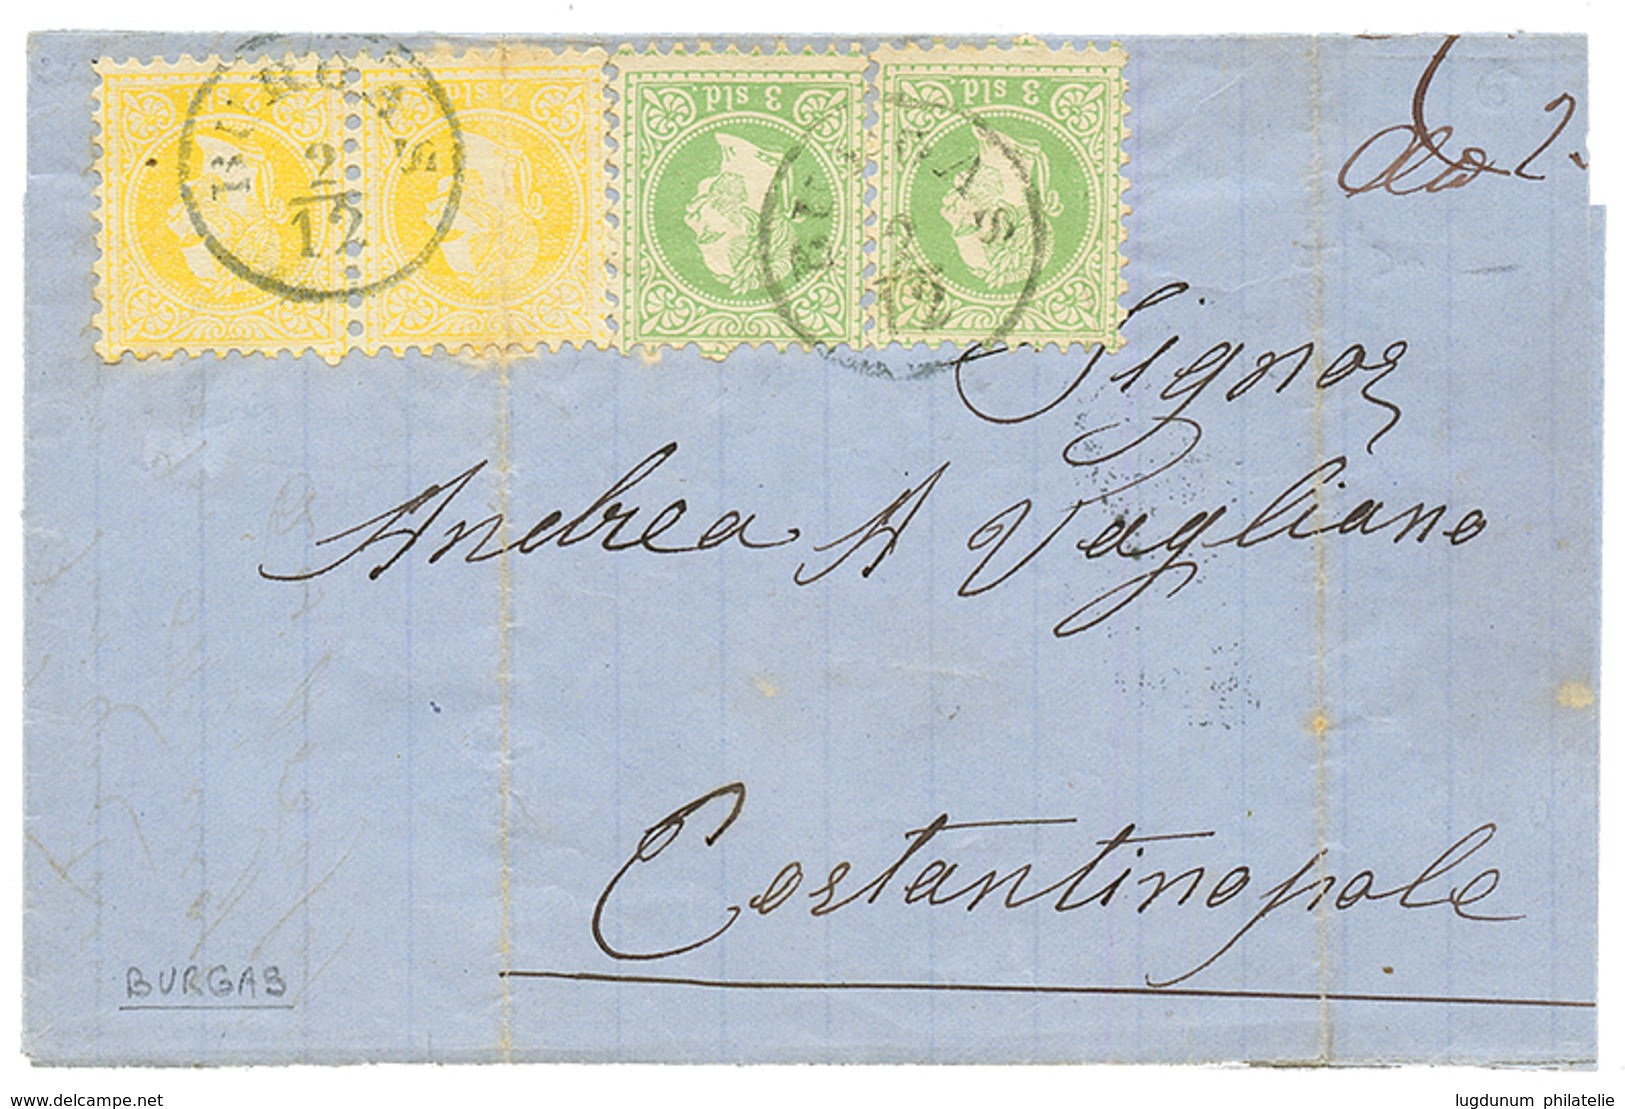 BURGAS : 1872 Pair 2 SOLDI (1 Stamp With Crease) + 3 SOLDI (x2) Canc. BURGAS On Entire To CONSTANTINOPLE. Very Rare Post - Eastern Austria